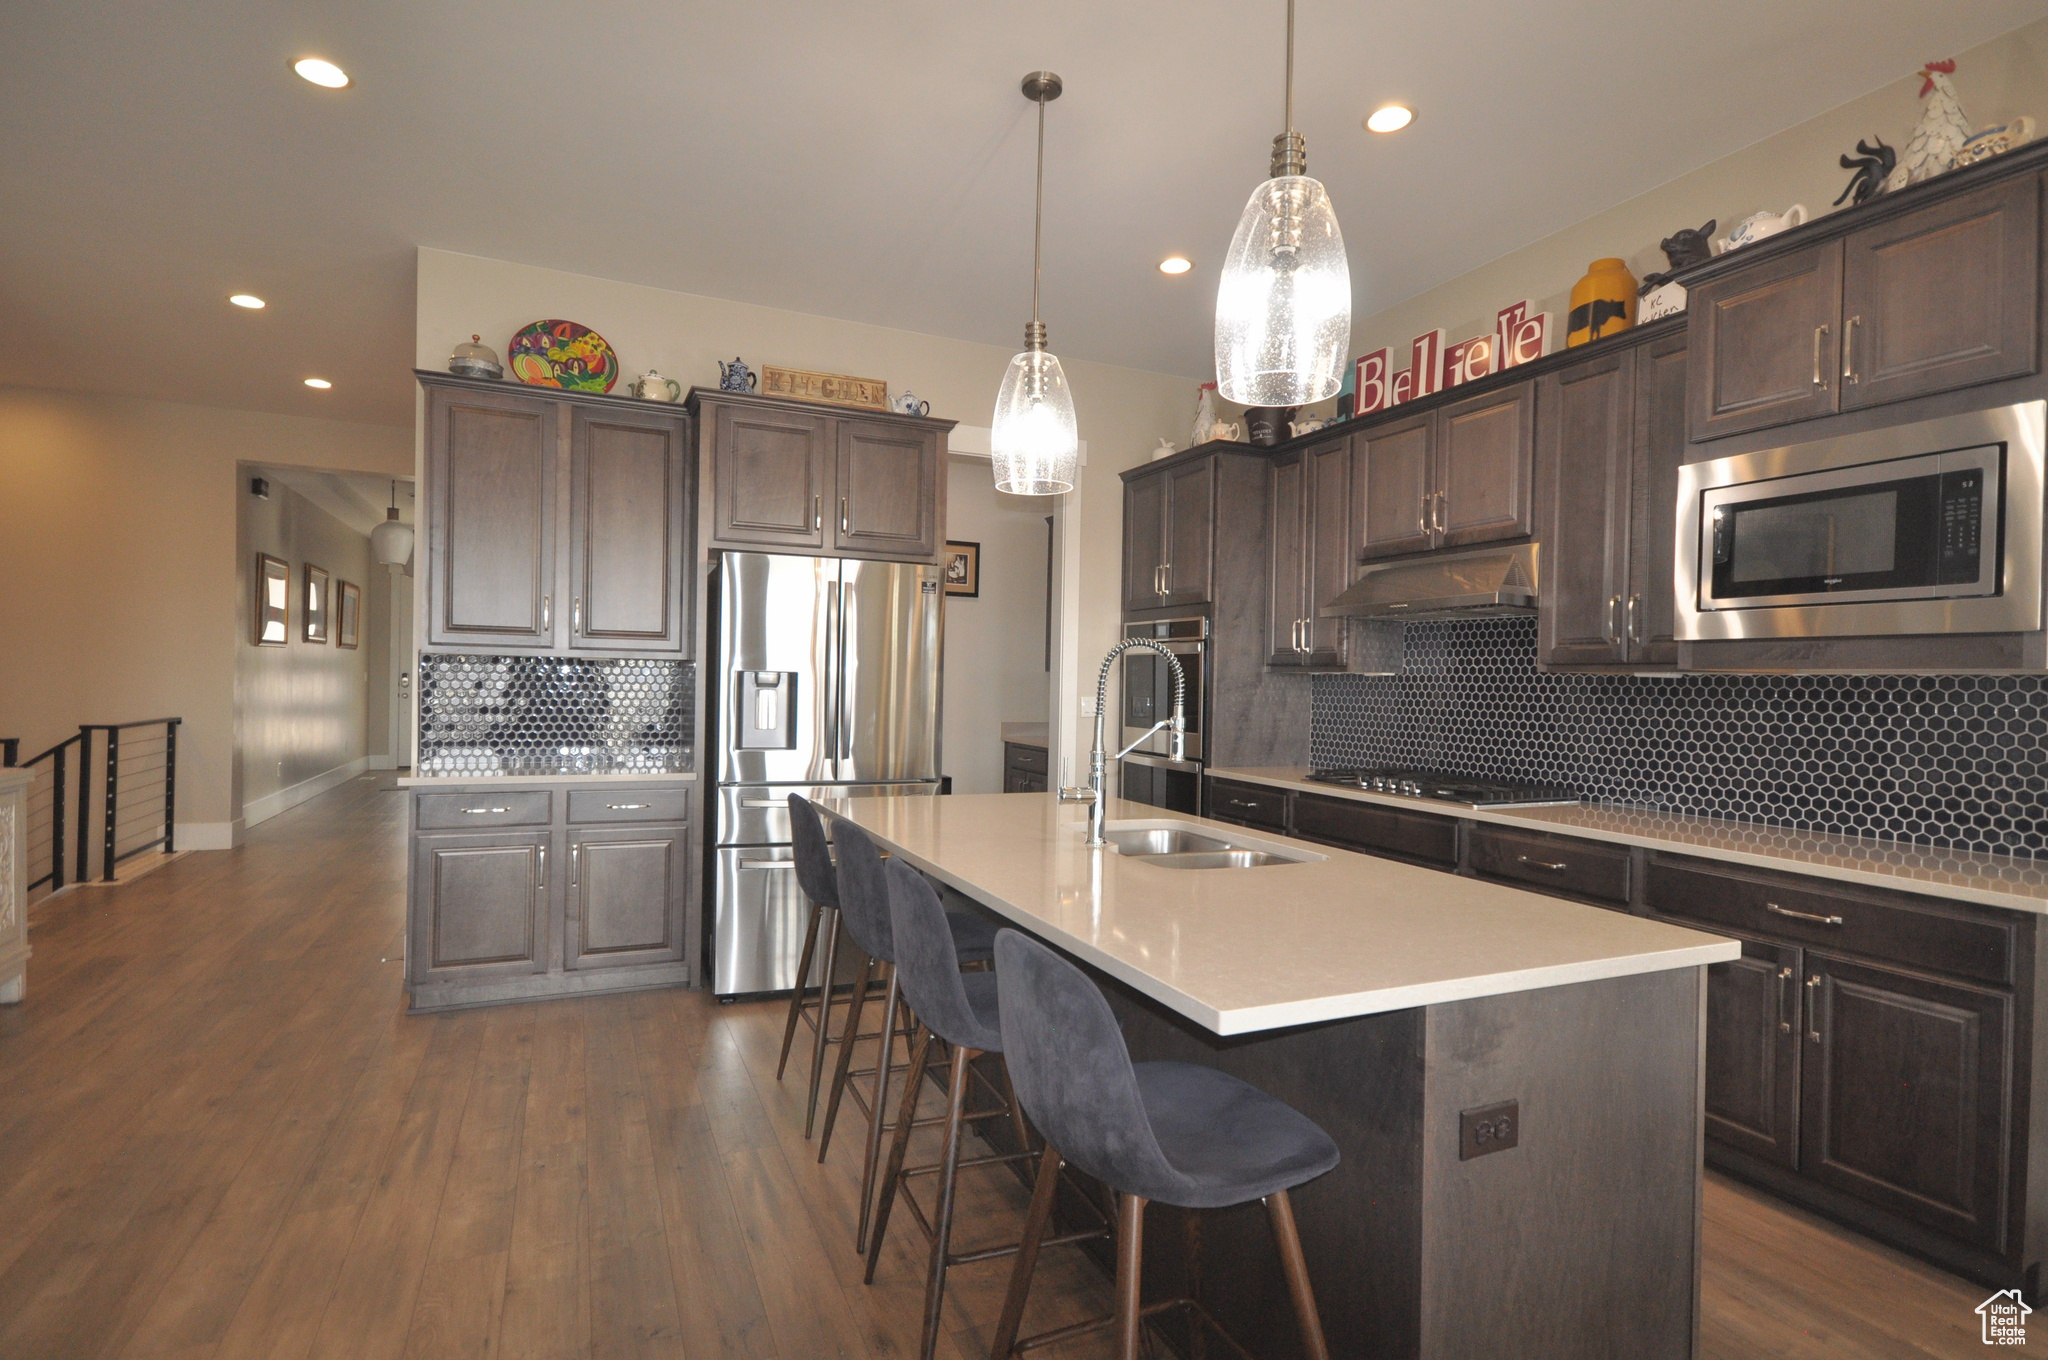 Kitchen with tasteful backsplash, appliances with stainless steel finishes, pendant lighting, dark hardwood / wood-style flooring, and an island with sink